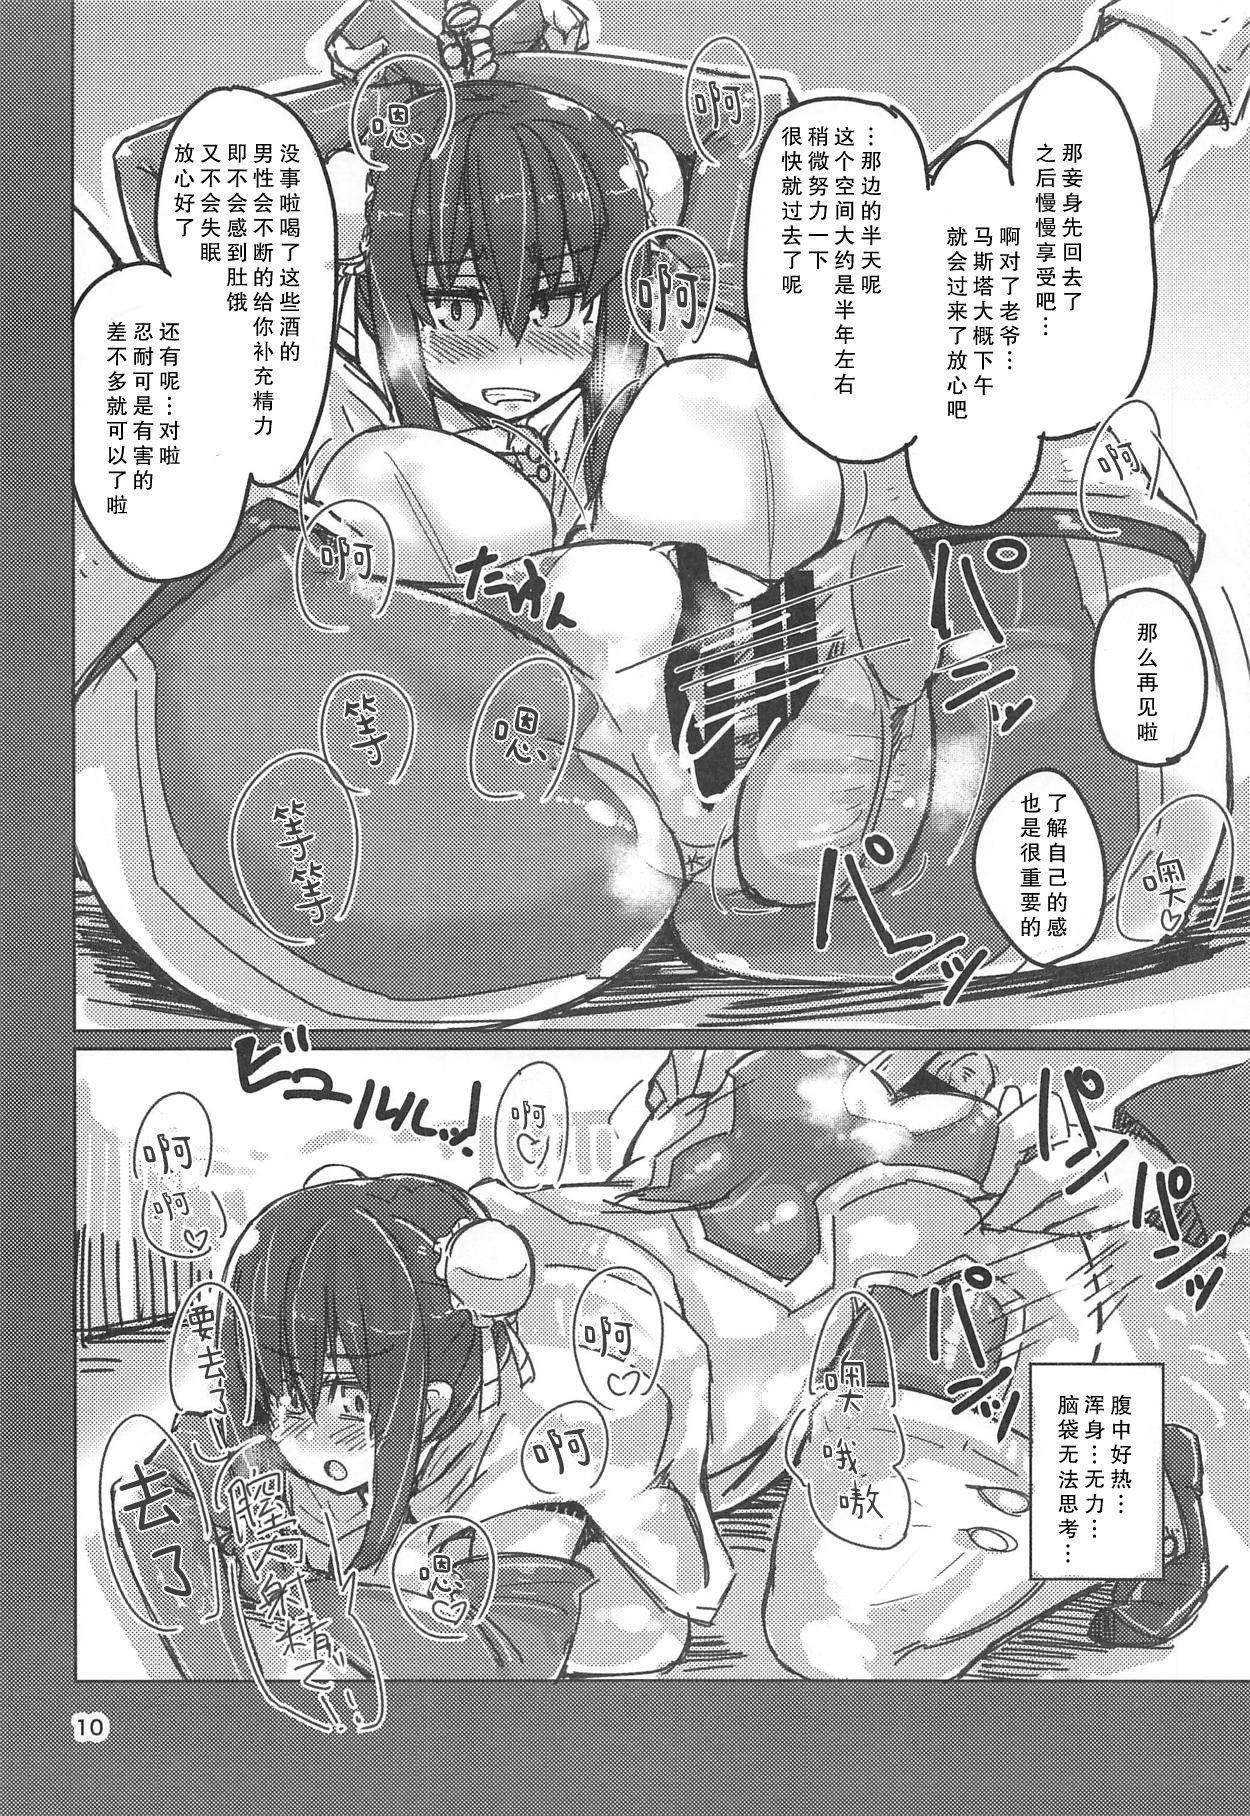 Stretch SHS - Fate grand order Sextape - Page 10